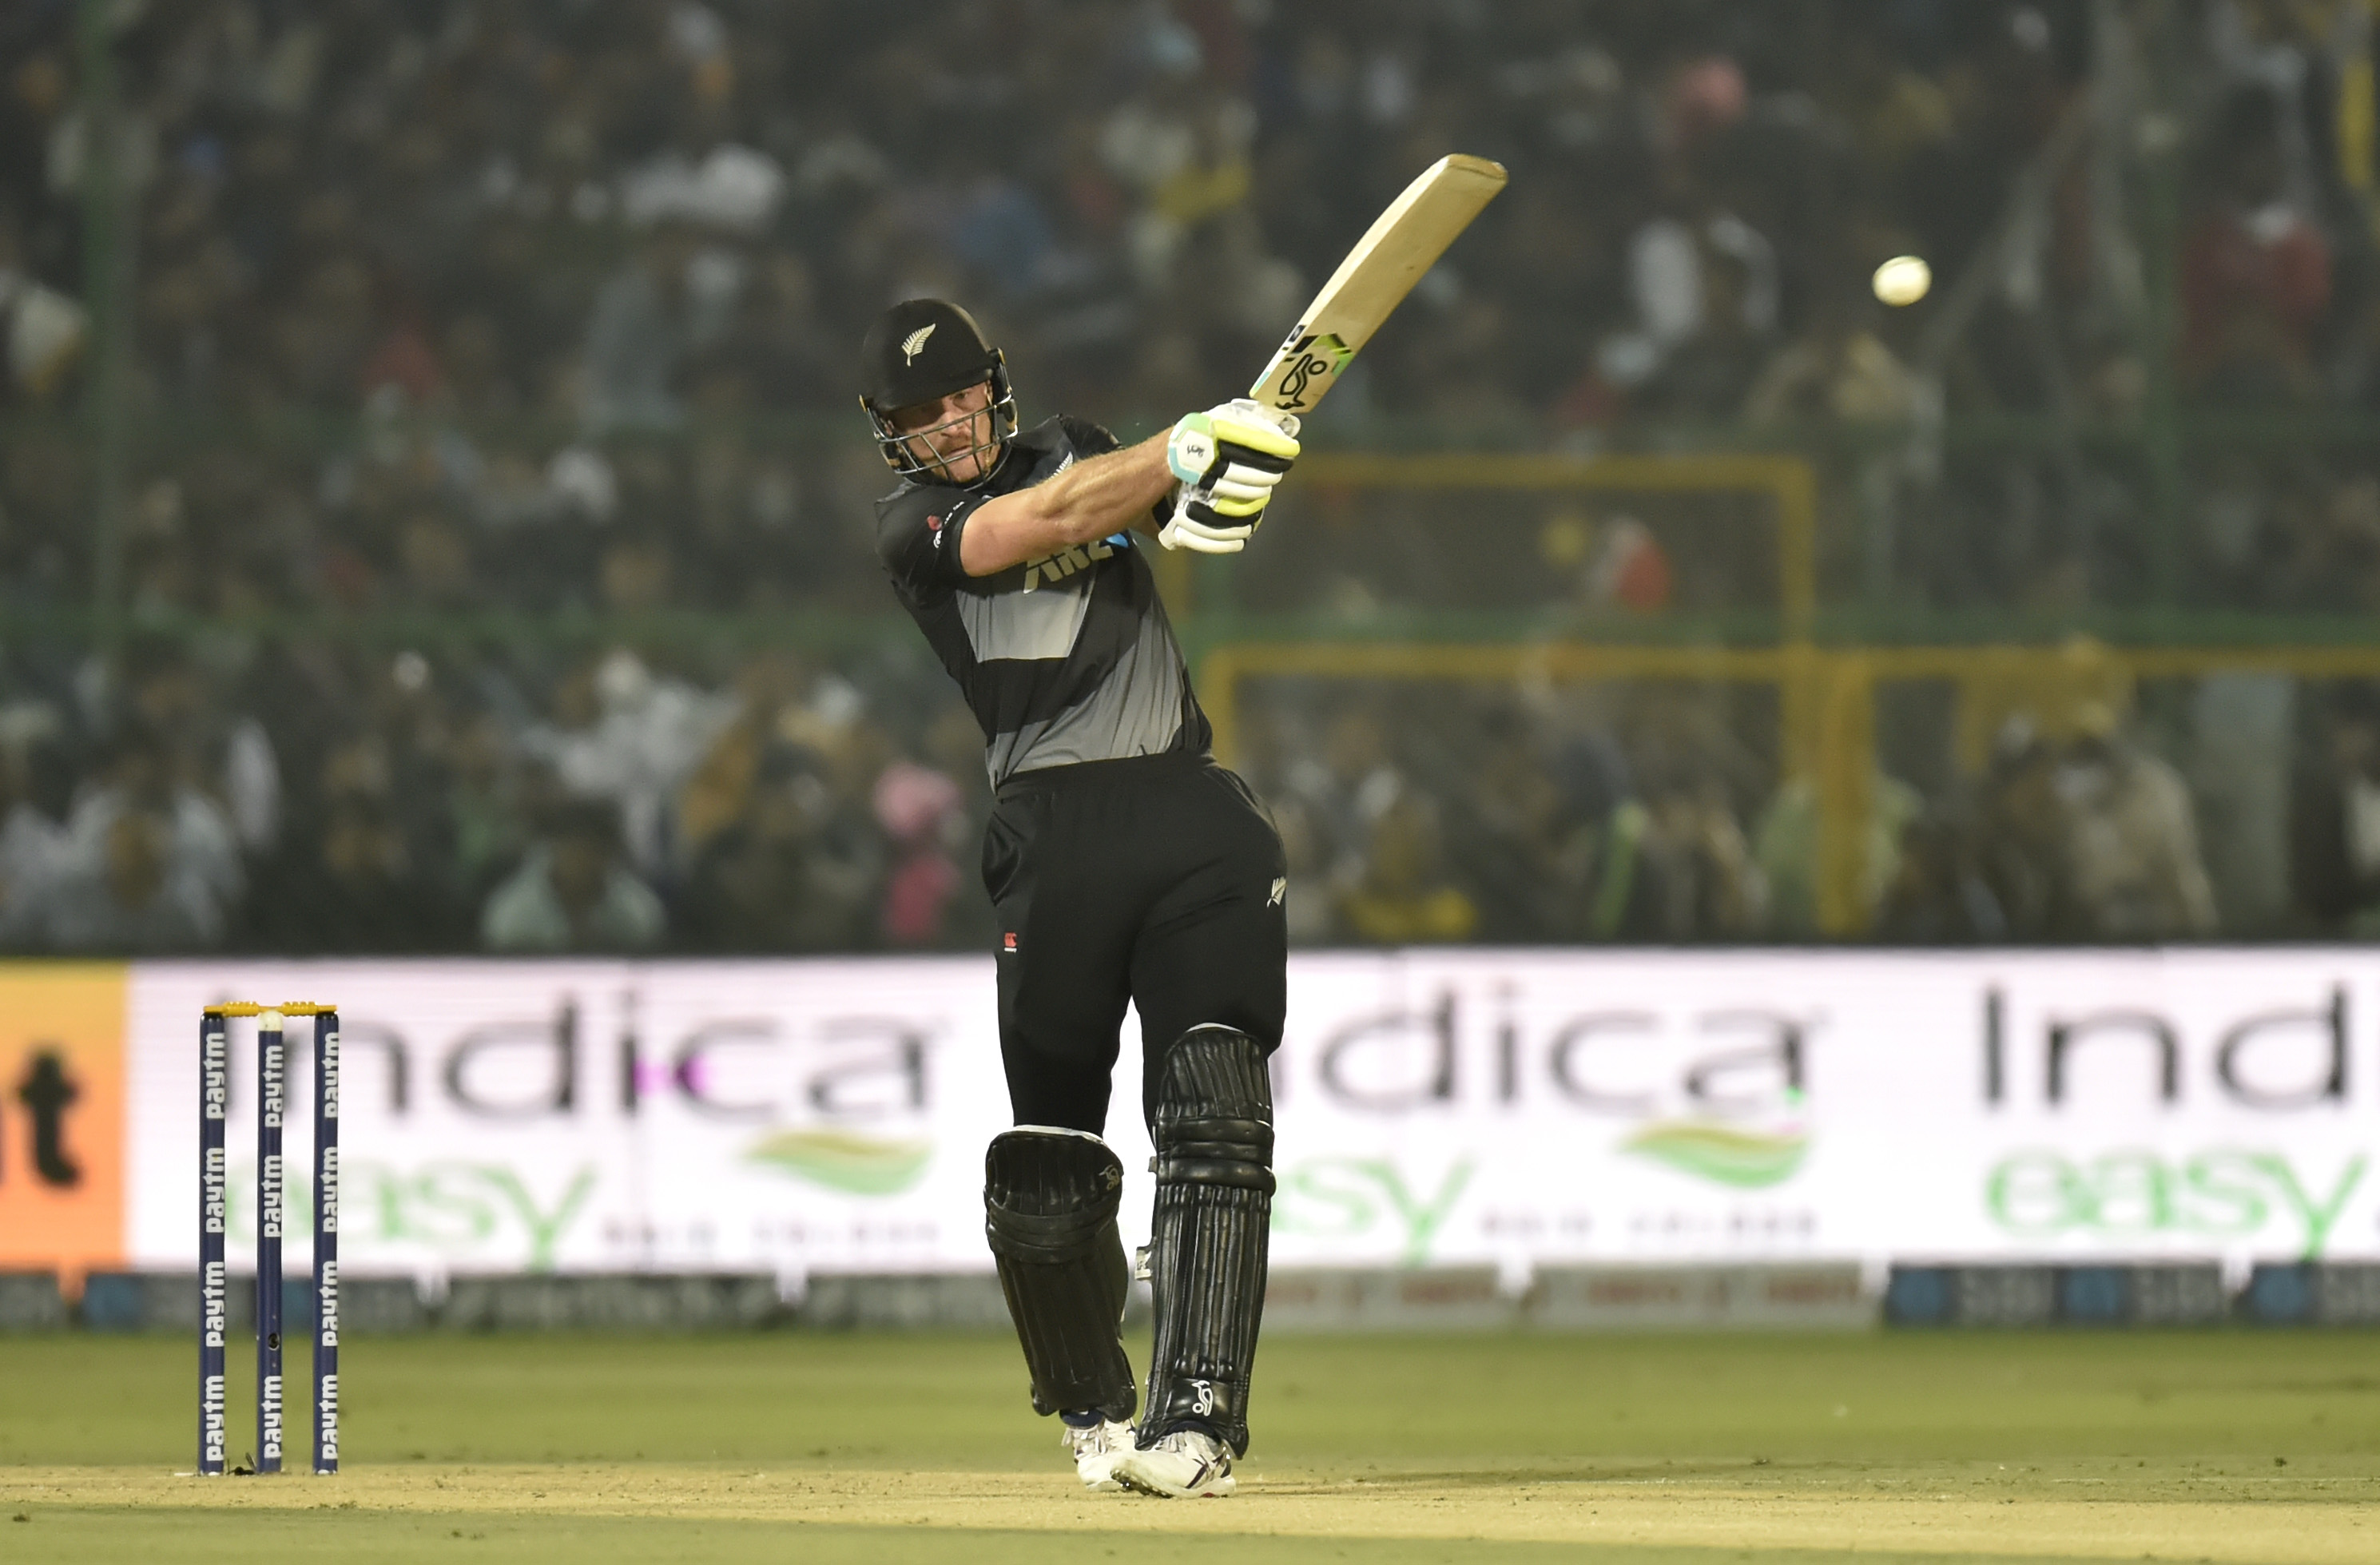 BBL 2022-23 | Martin Guptill joins Melbourne Renegades after being released from New Zealand central contract 